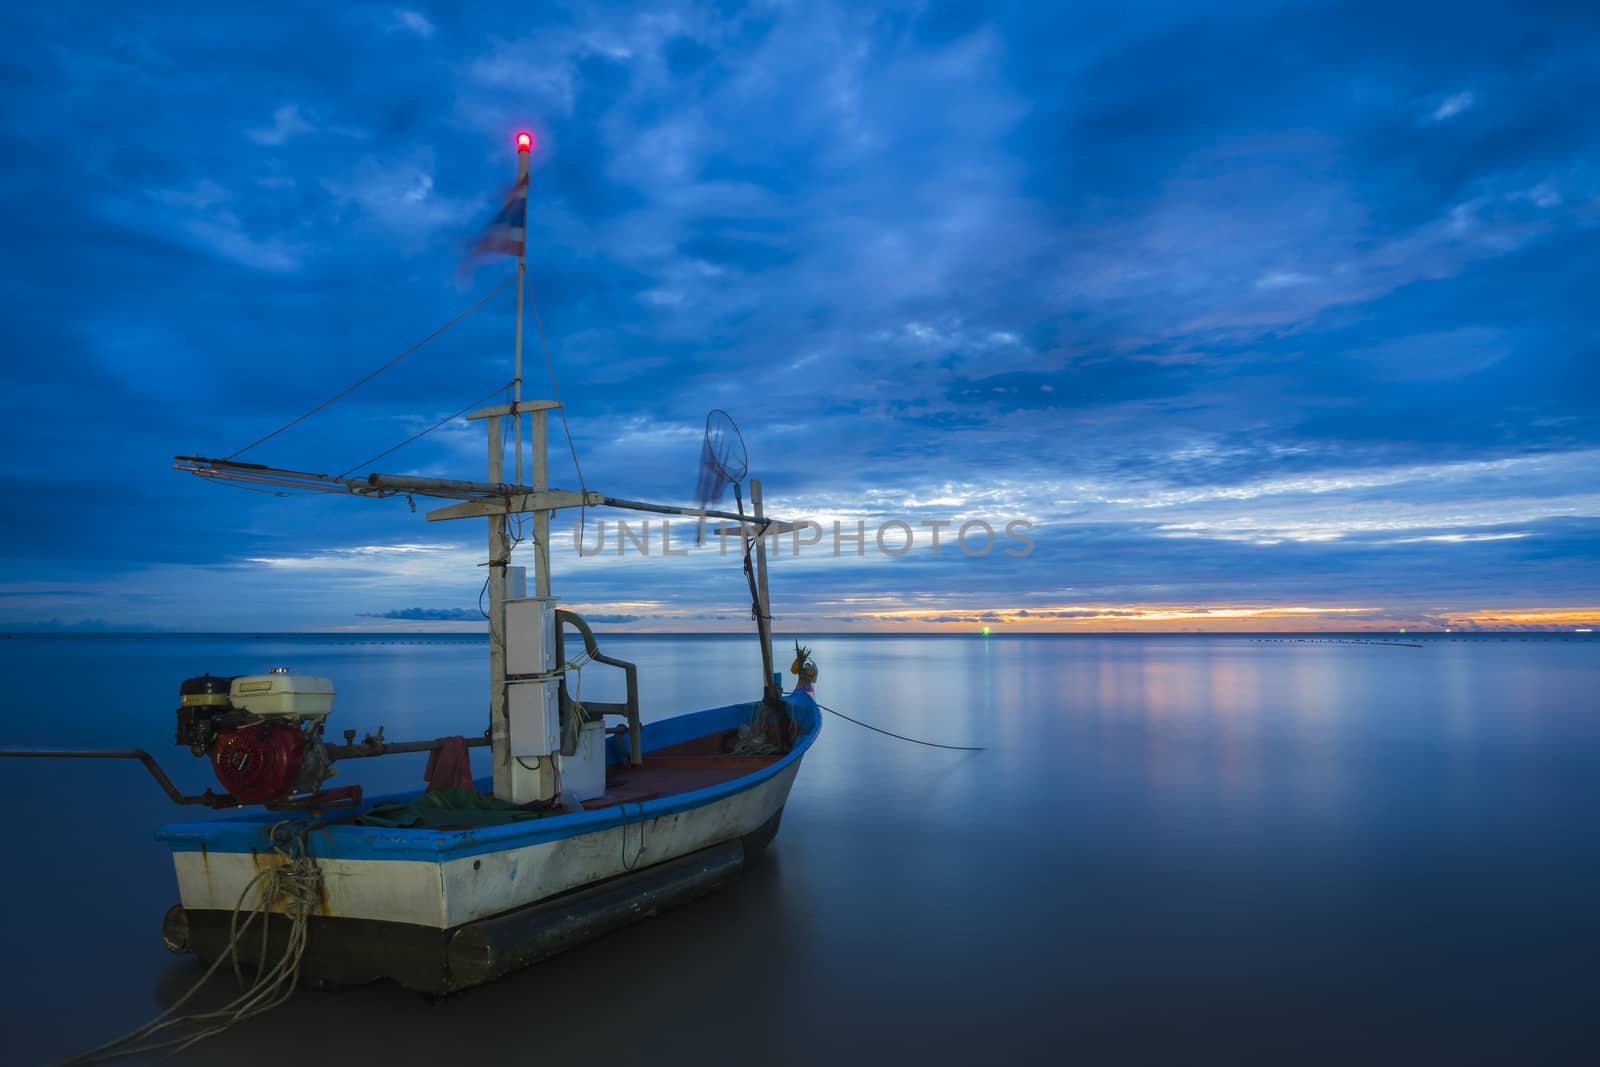 Fish boat rest on a for work in dawn by hongee